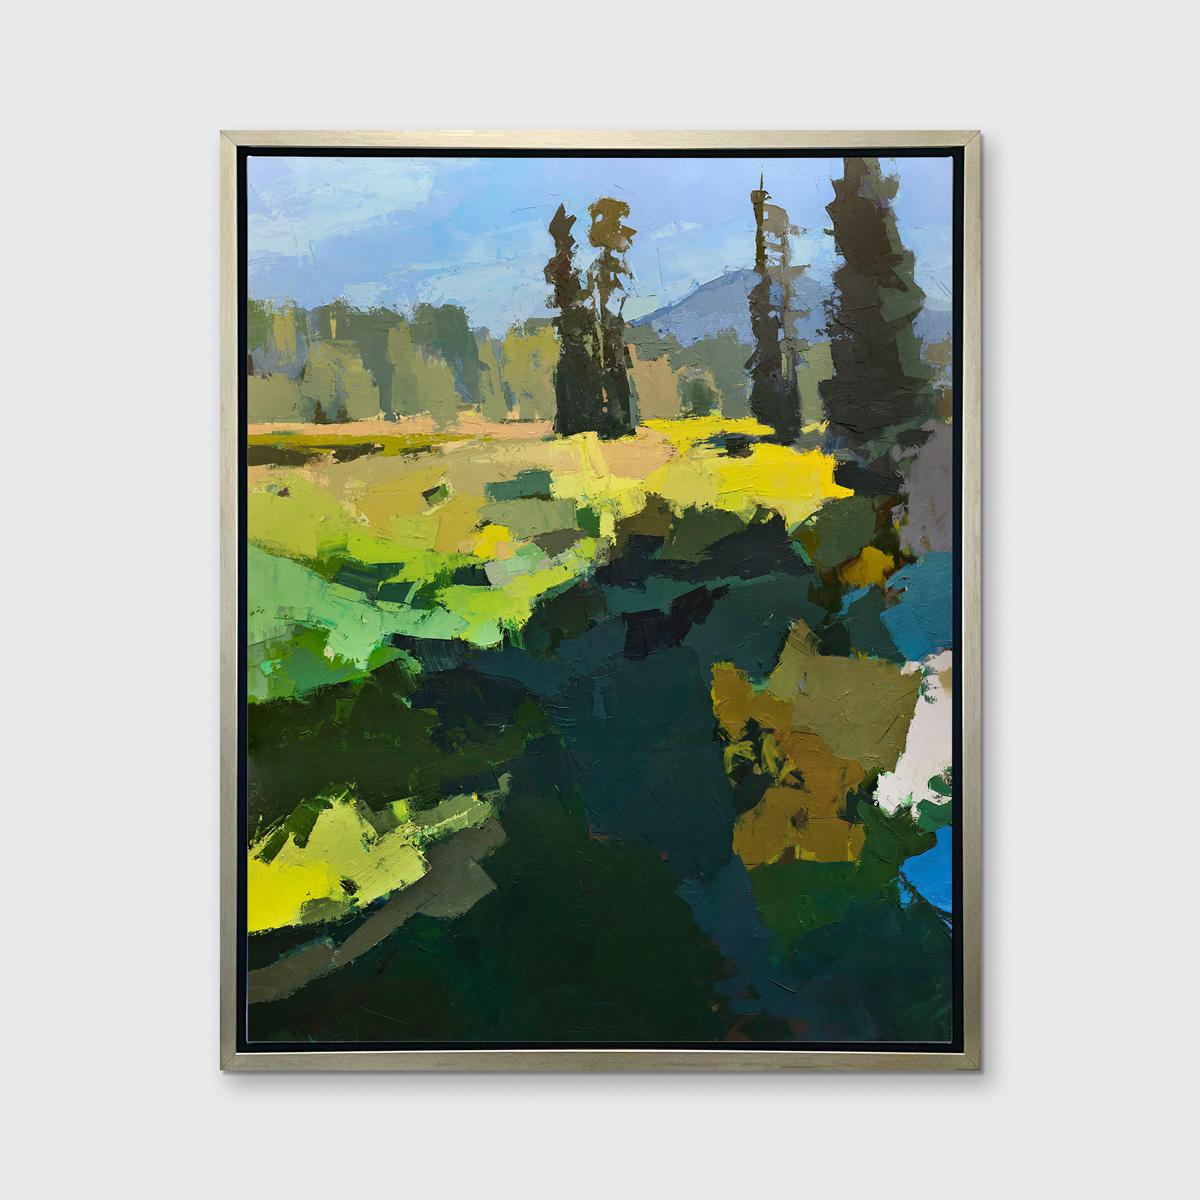 Bri Custer Landscape Print - "A Propensity for Growth" Framed Limited Edition Print, 50" x 40"